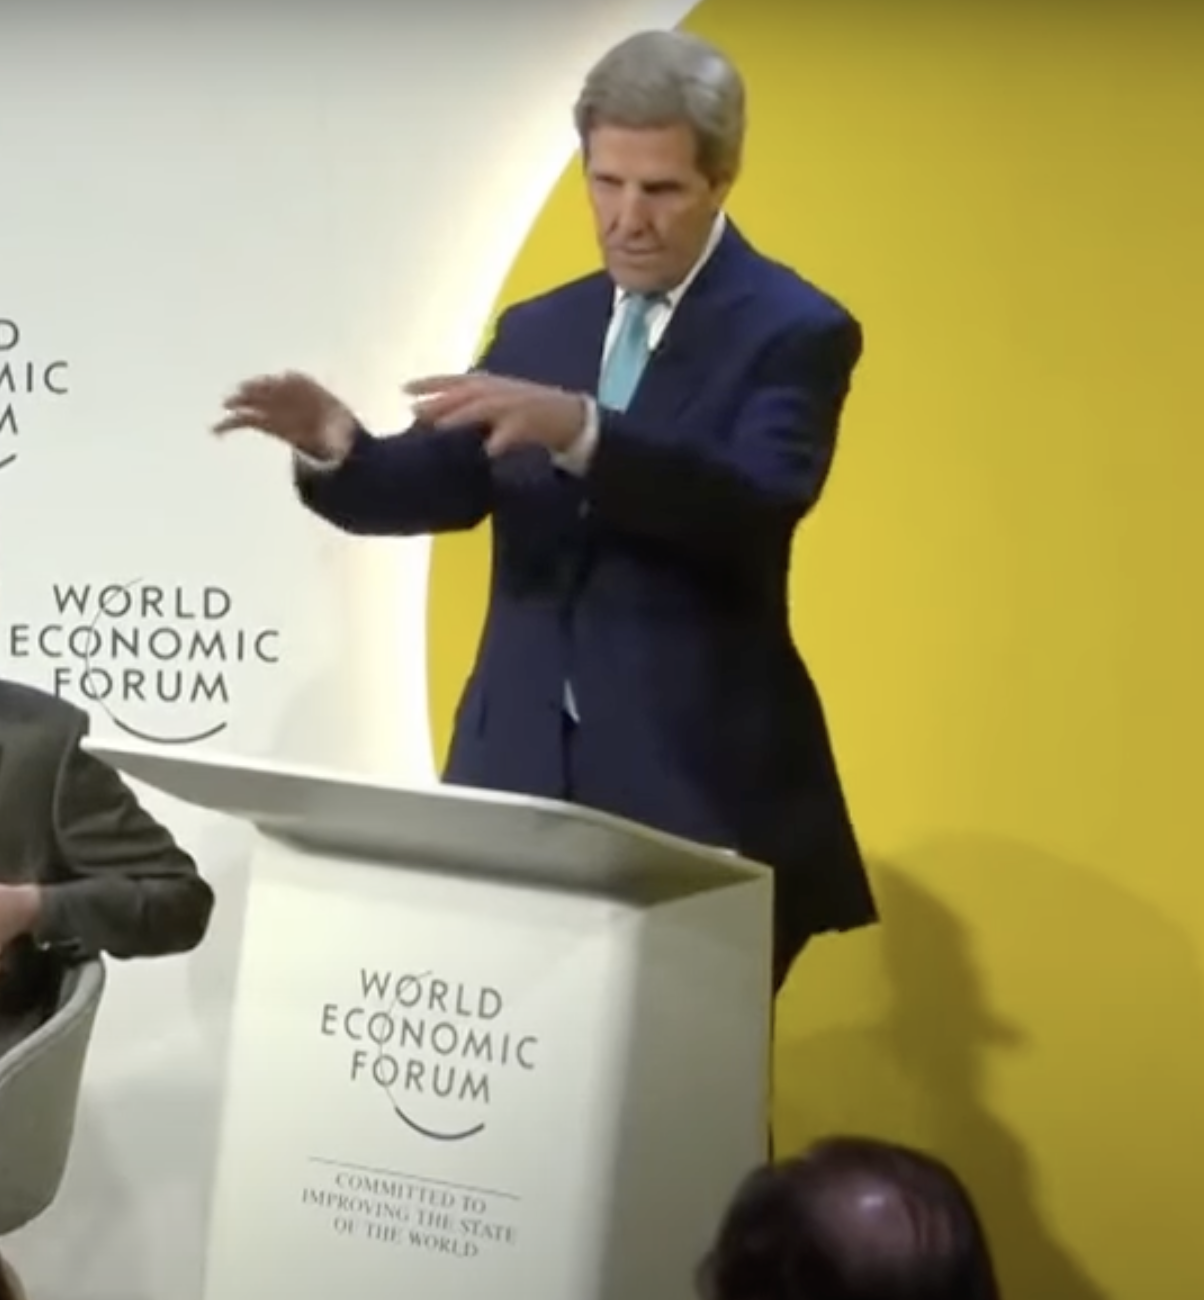 Watch: John Kerry Says WEF Davos Elite Are Like ‘Extraterrestrials’ Here to ‘Save the Planet’ – Touts himself as one of a ‘select group of human beings’